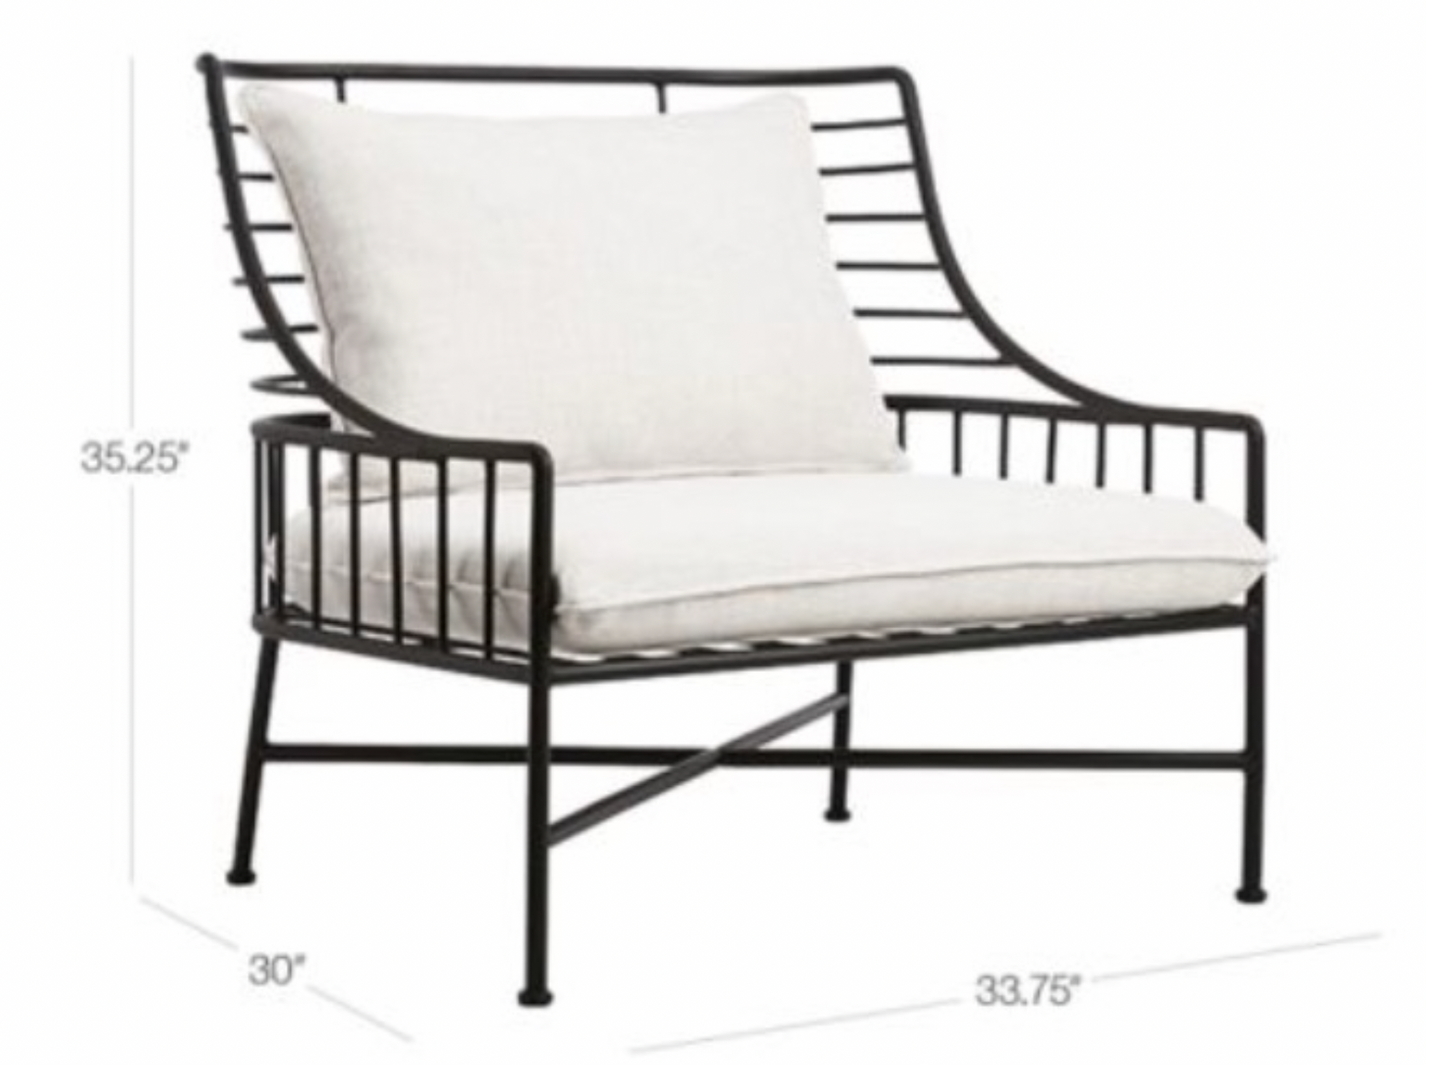 Black metal outdoor chair with seat & back cushions